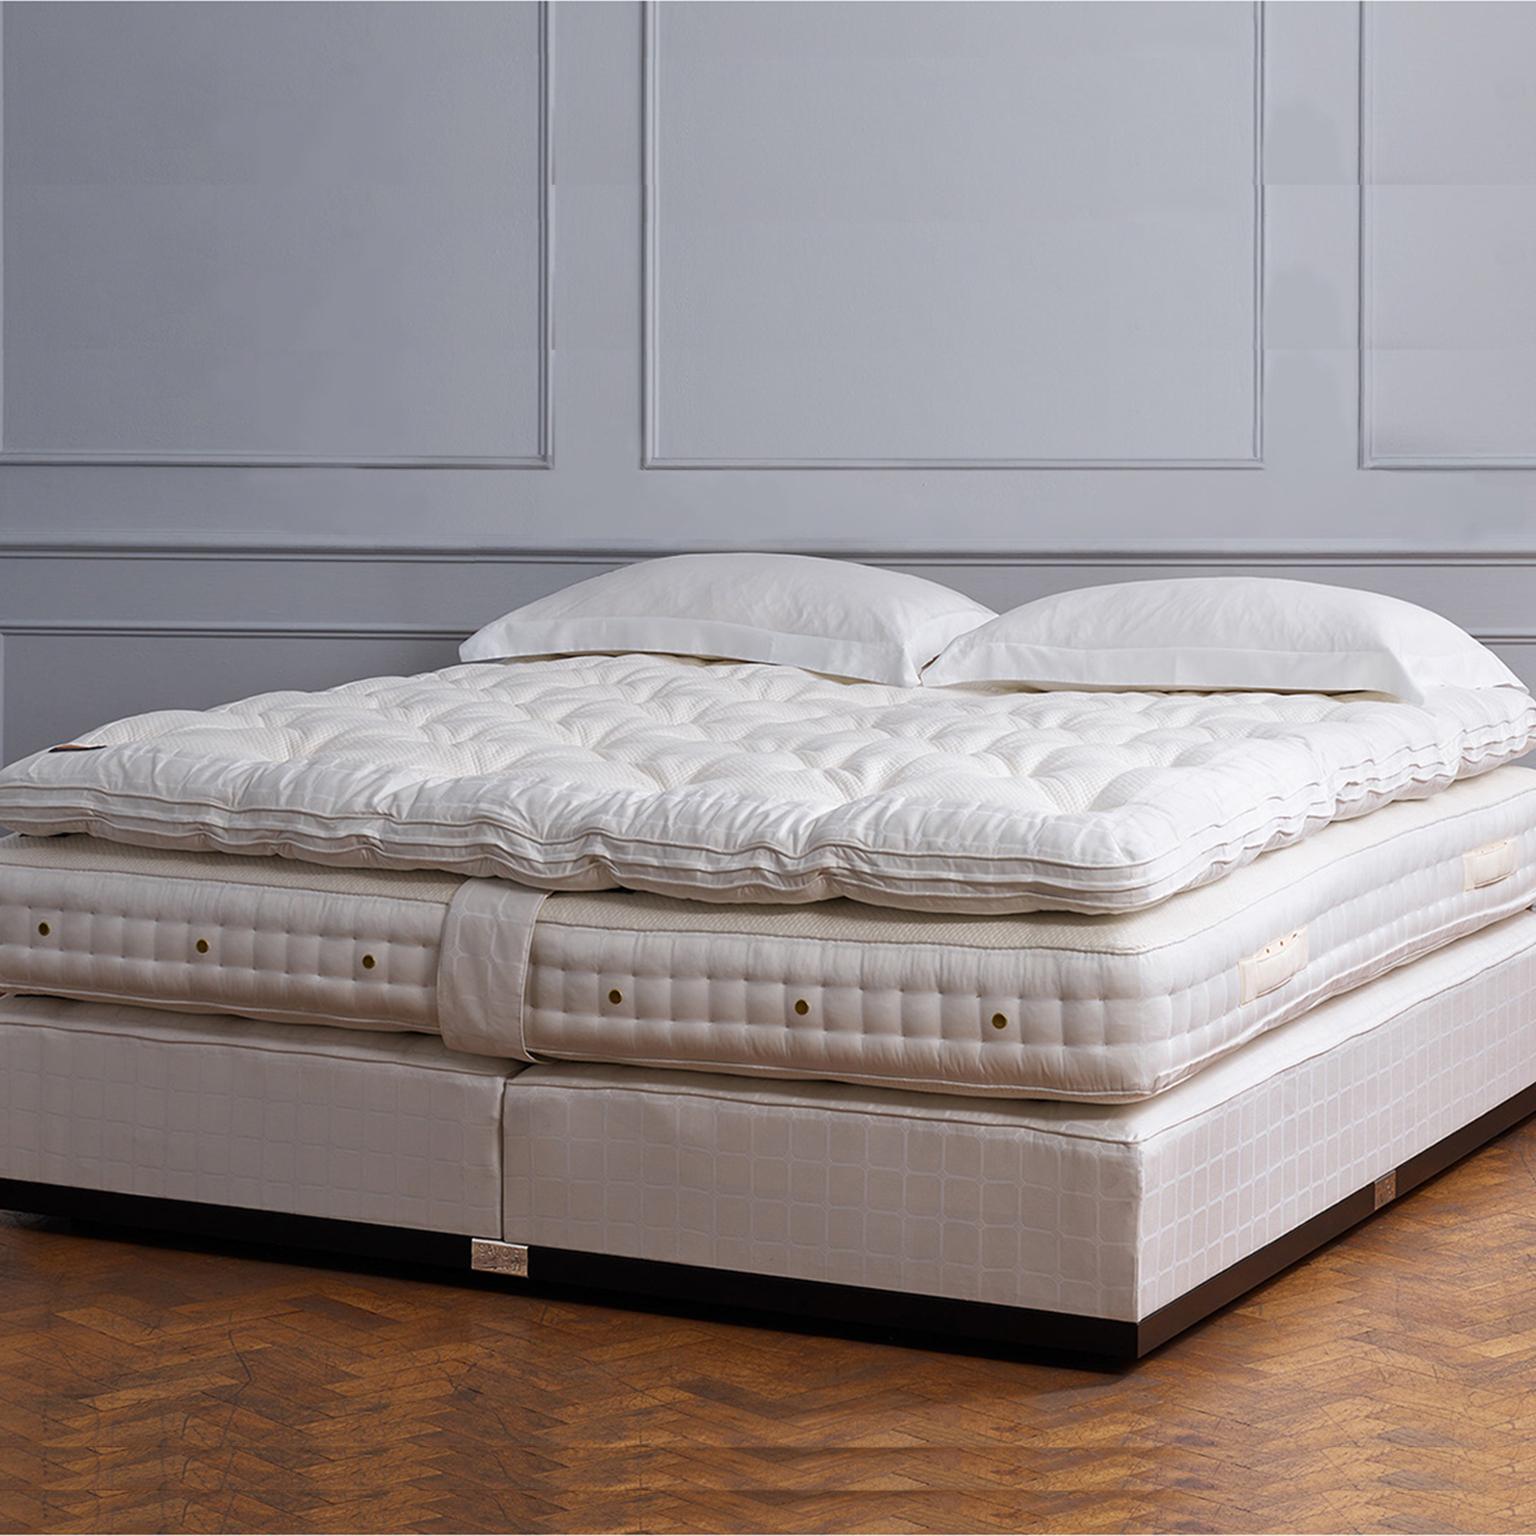 The culmination of over a century of bed-making expertise, requiring at least 120 hours of handcrafting, the Nº1 is the ultimate in luxury. Every Savoir Nº1 bed is a masterpiece, constructed and perfected by a single craftsperson in our London